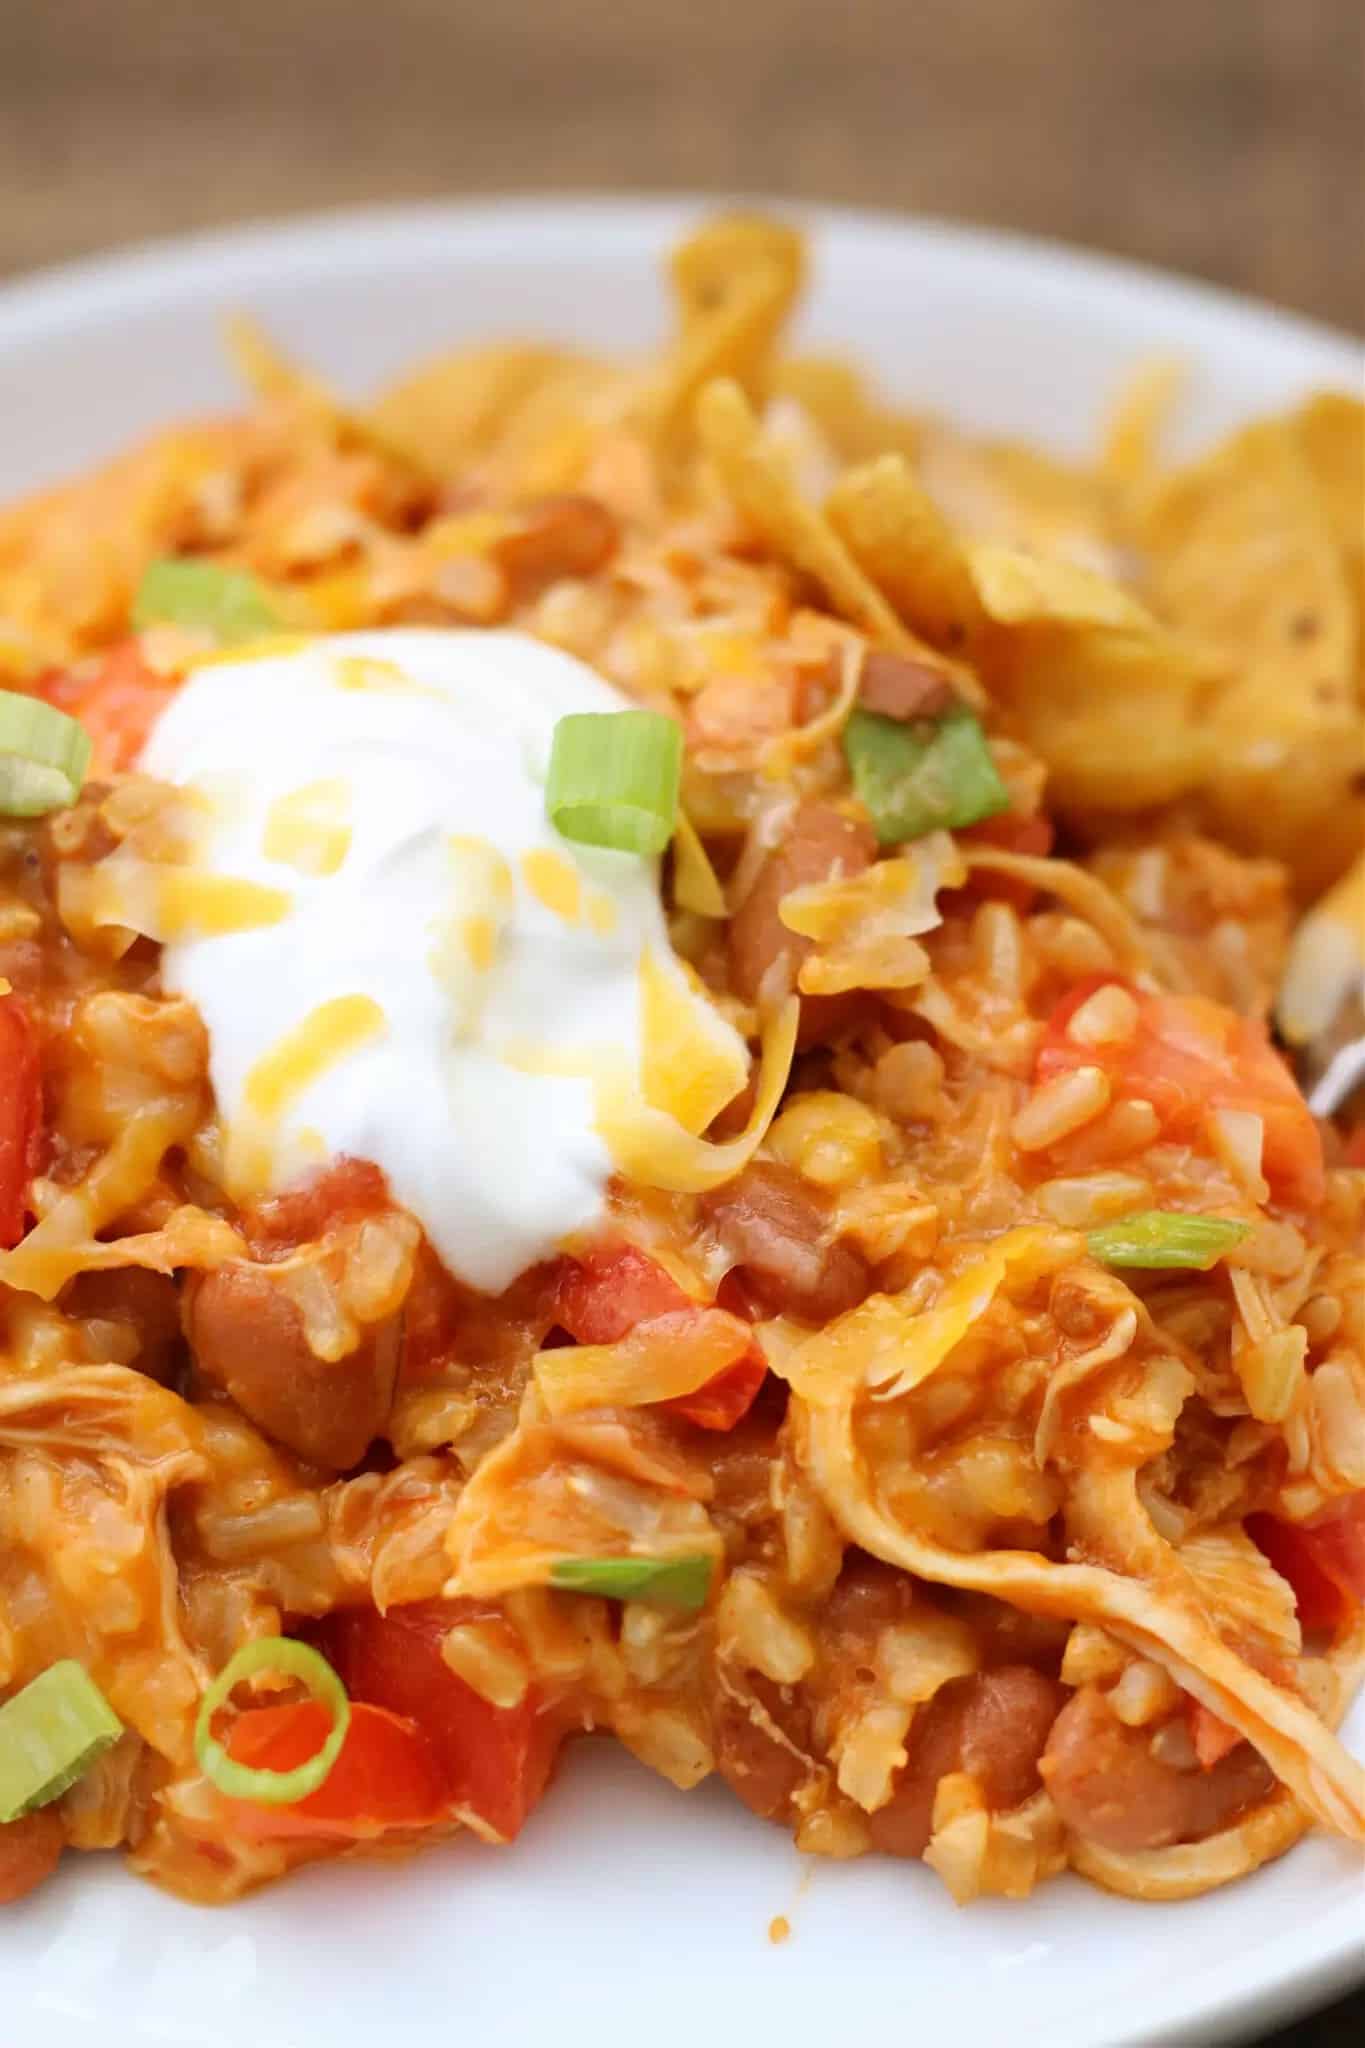 Instant Pot Mexican Casserole from 365 Days of Slow + Pressure Cooking